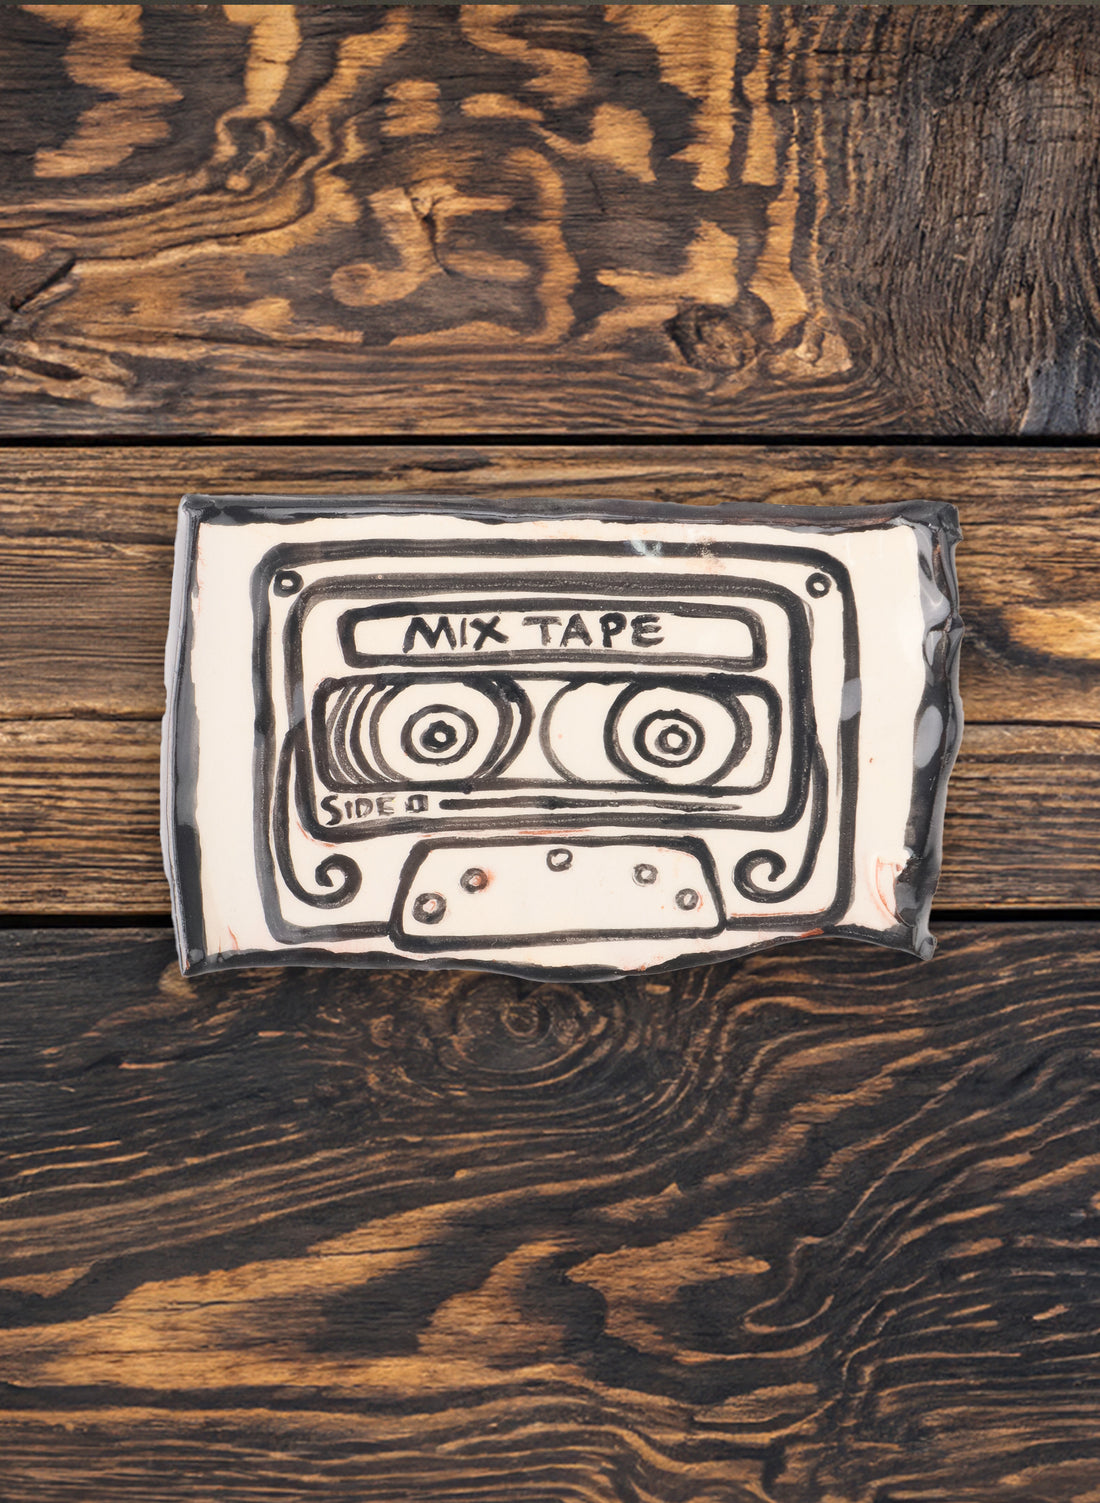 Wall Tile - Mix Tape